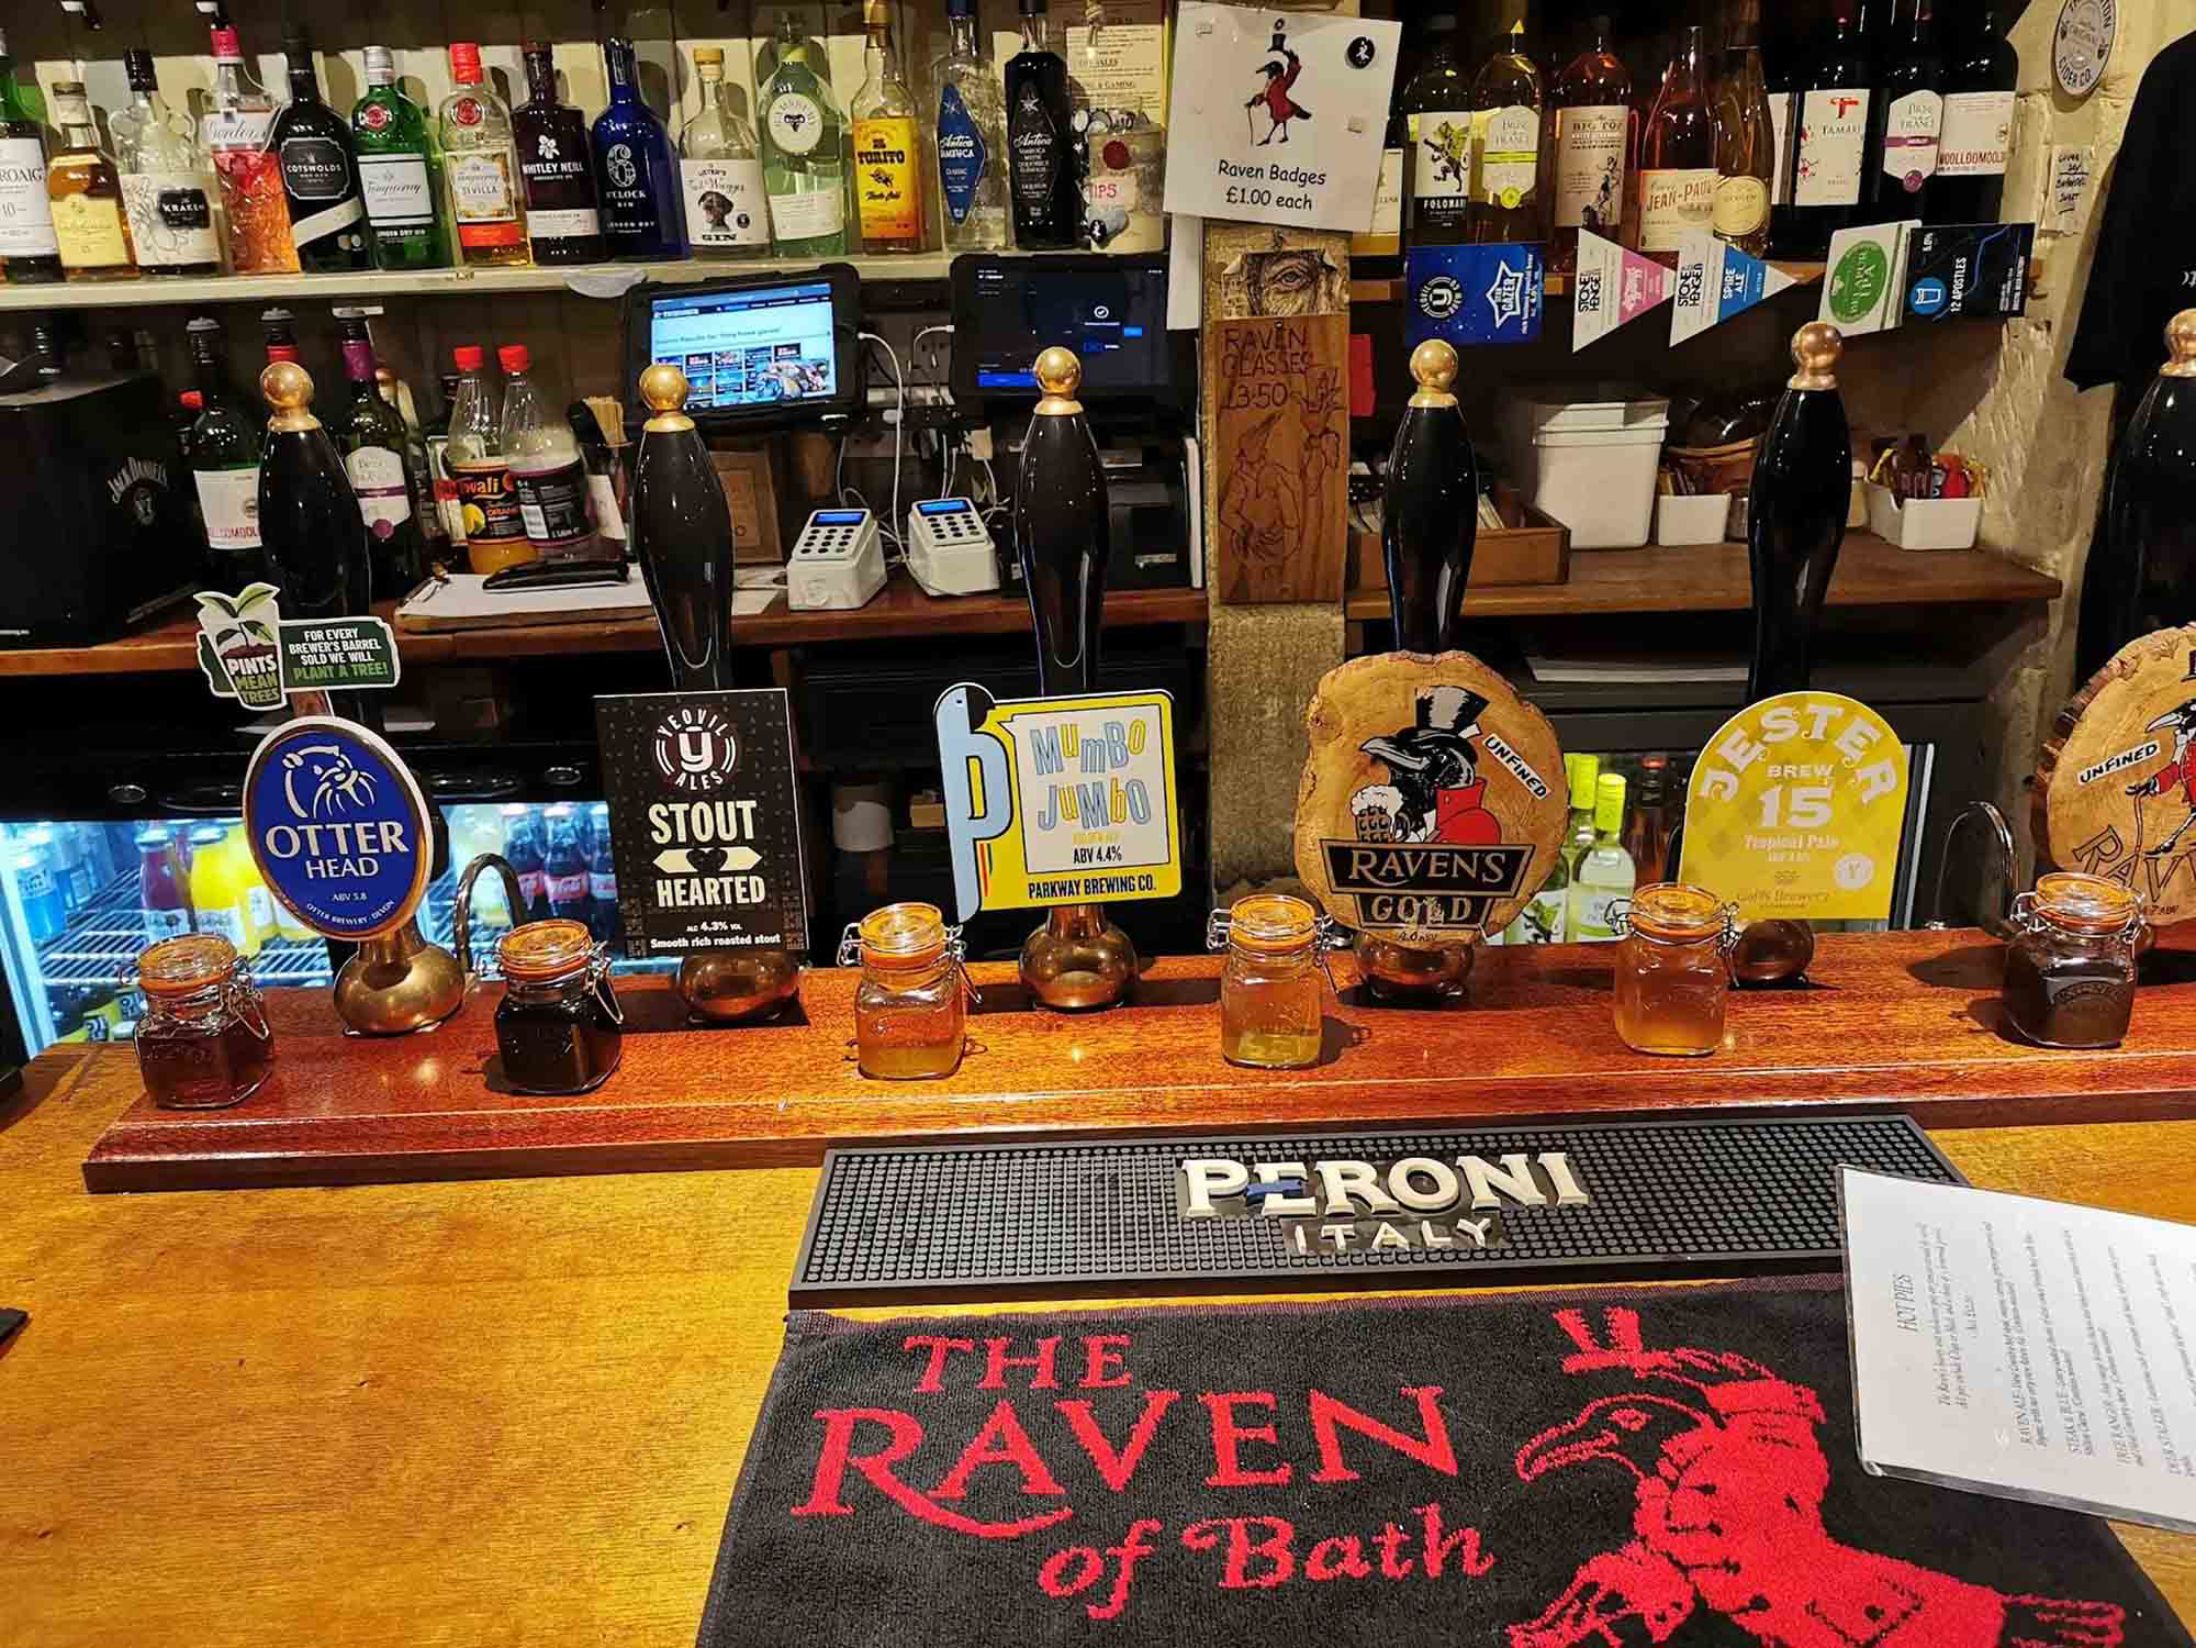 The Raven - Best Bars in Bath